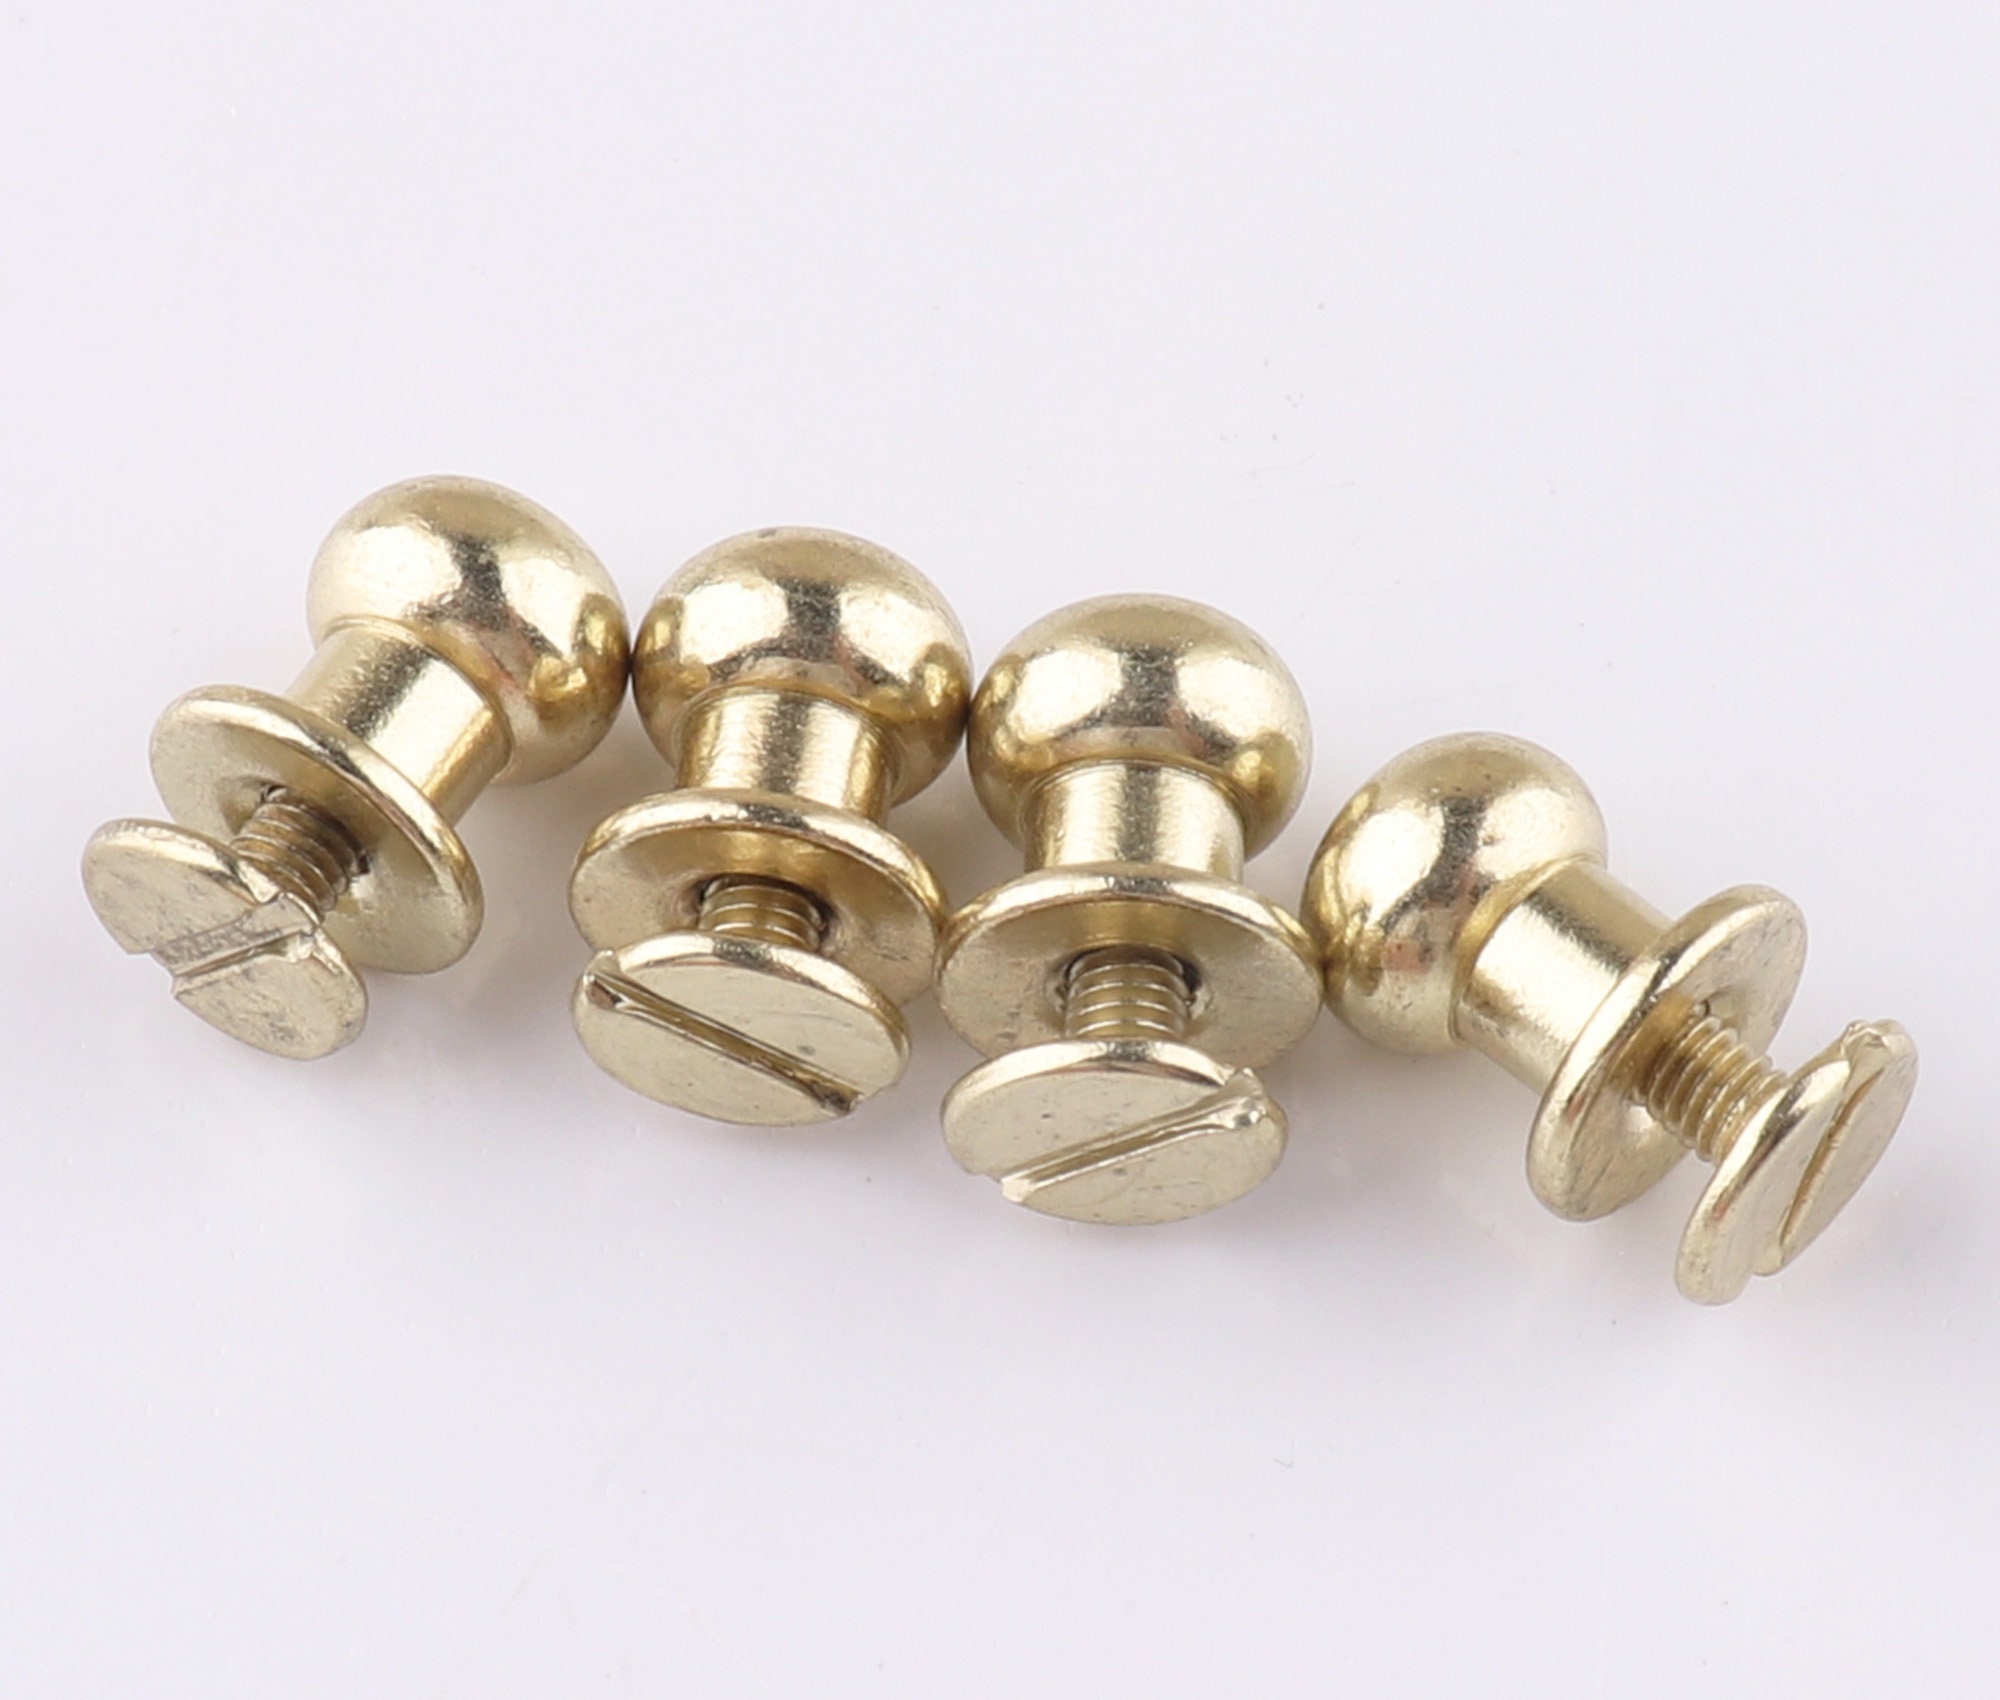 10pcs New Binding Chicago Screws Metal Nails Studs Rivets For